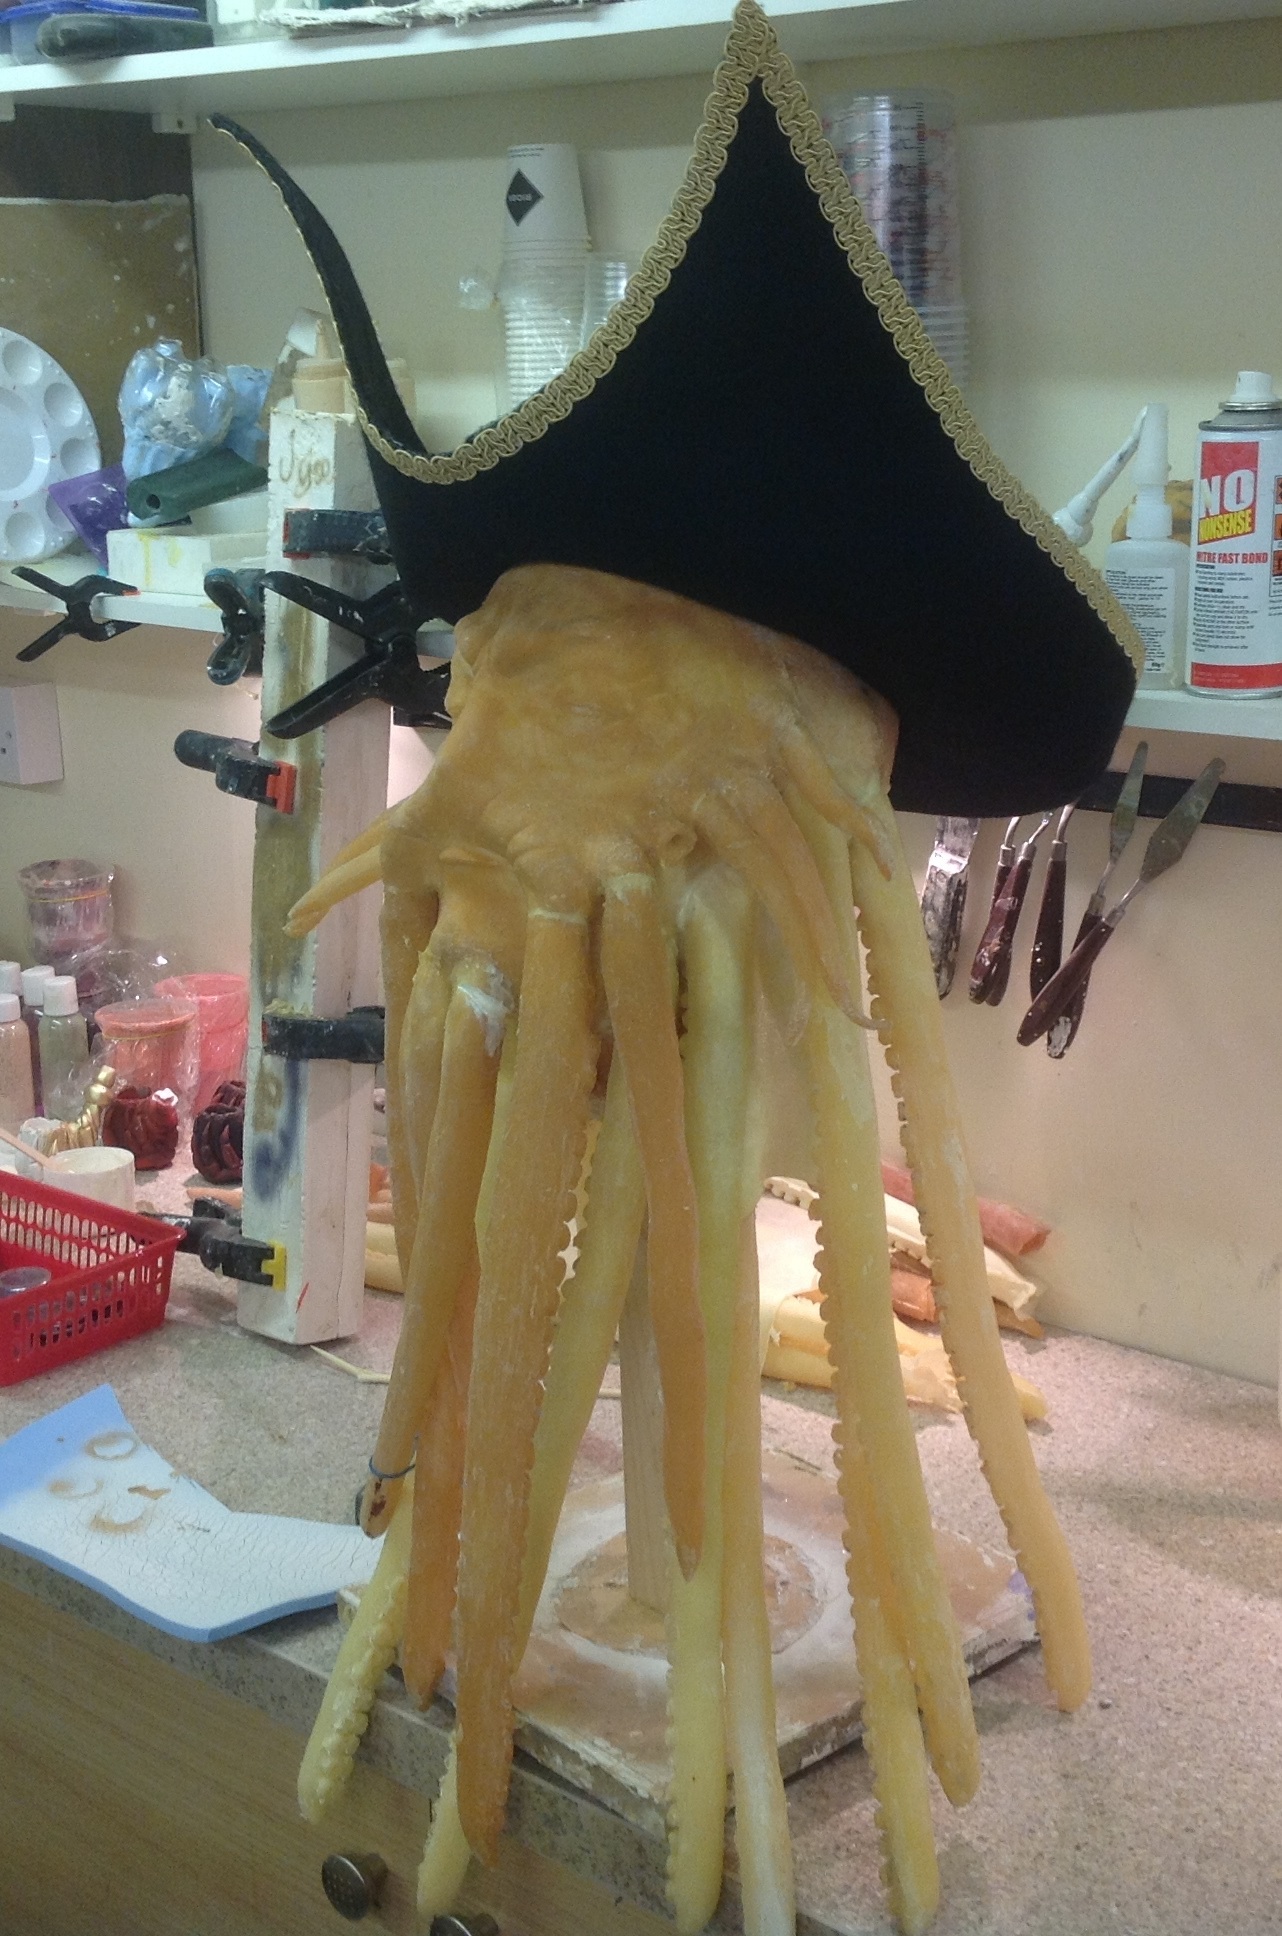 Davy Jones - turned from mask into a costume | RPF Costume and Prop Maker  Community